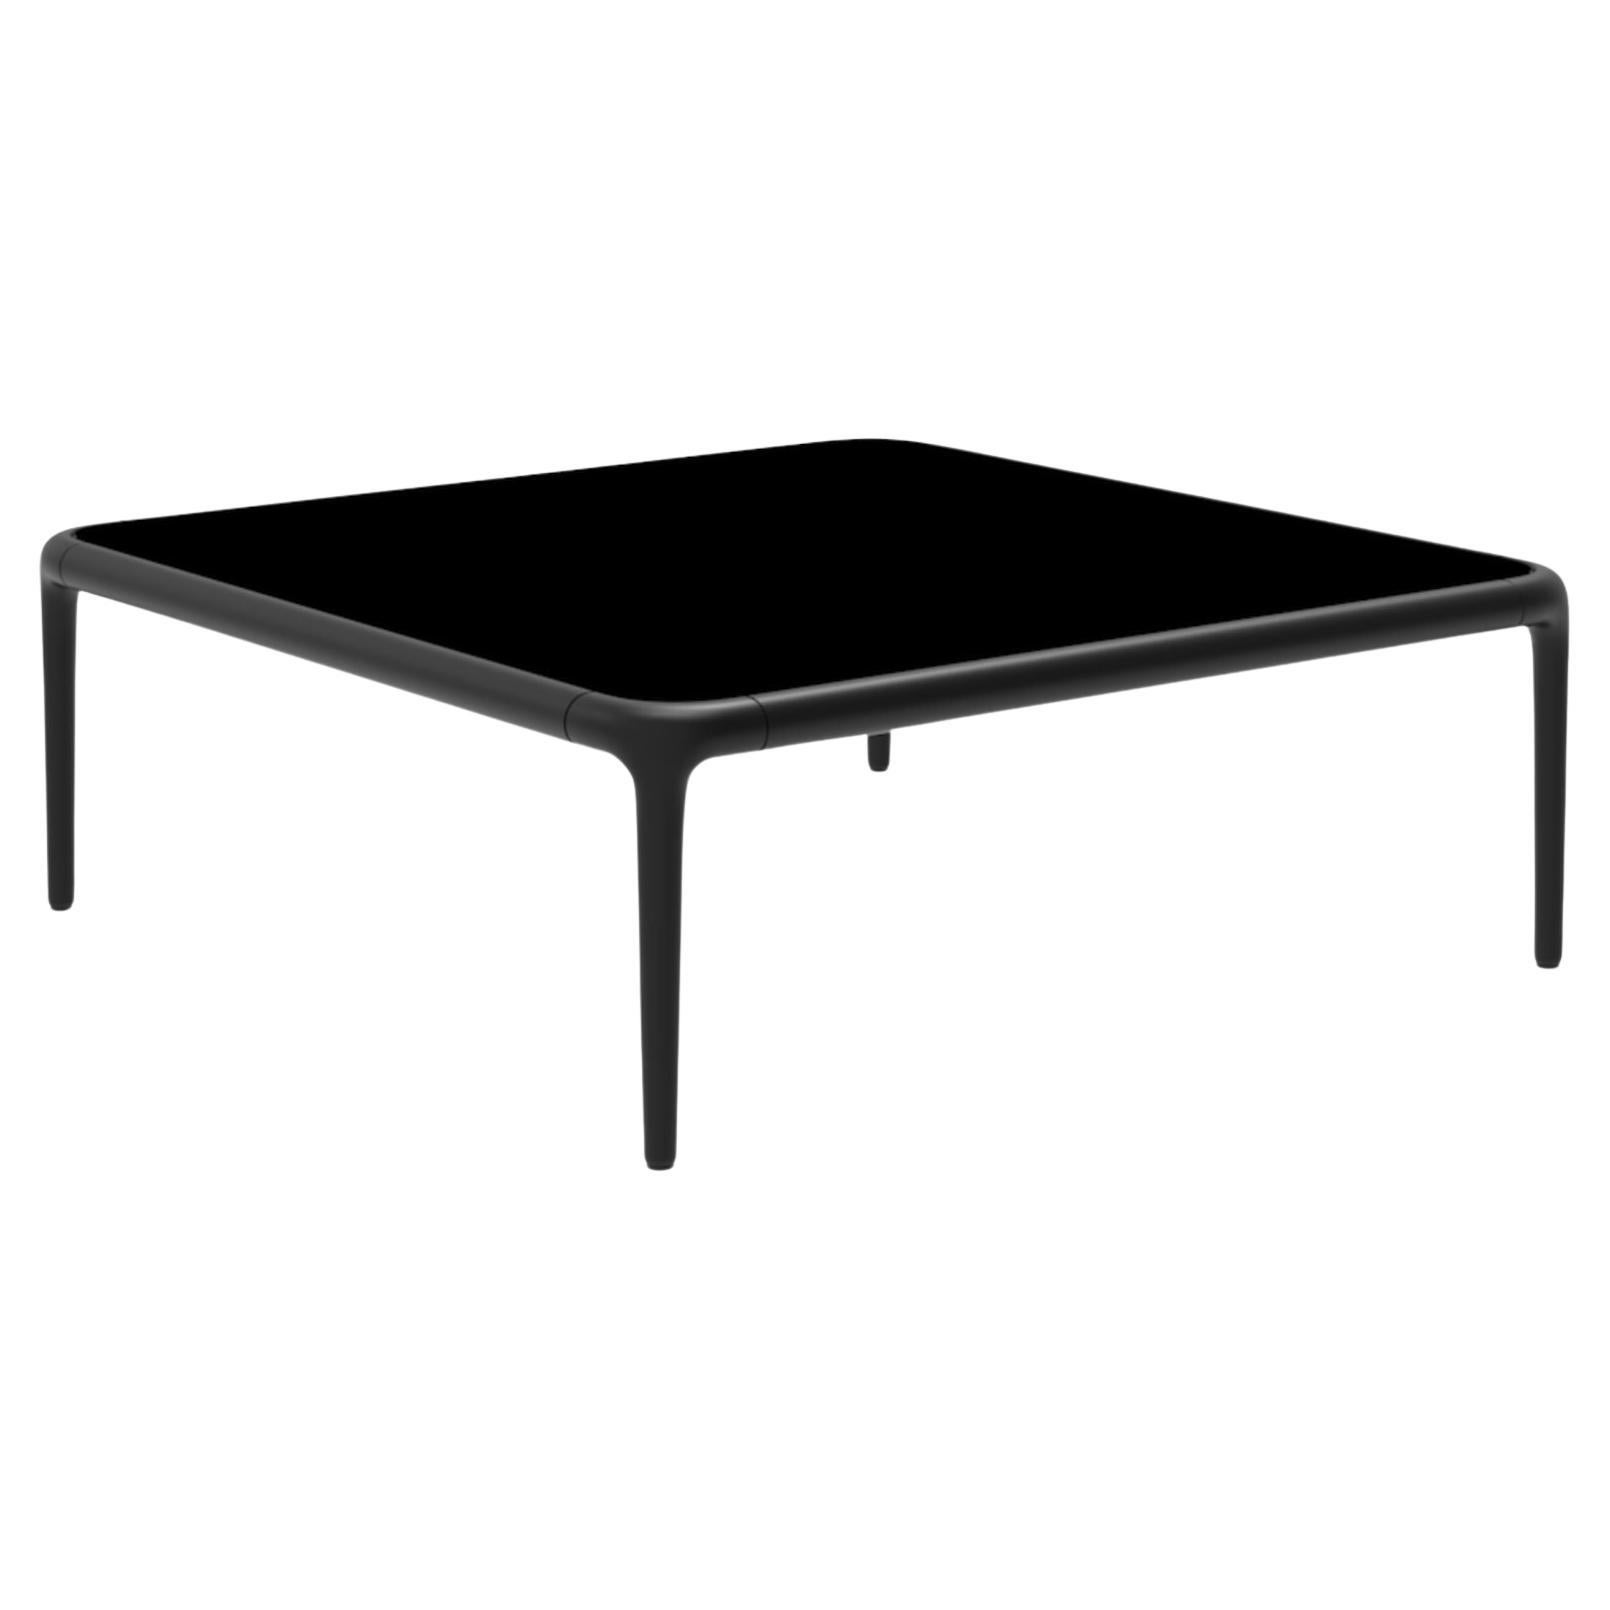 Xaloc Black Coffee Table 80 with Glass Top by Mowee